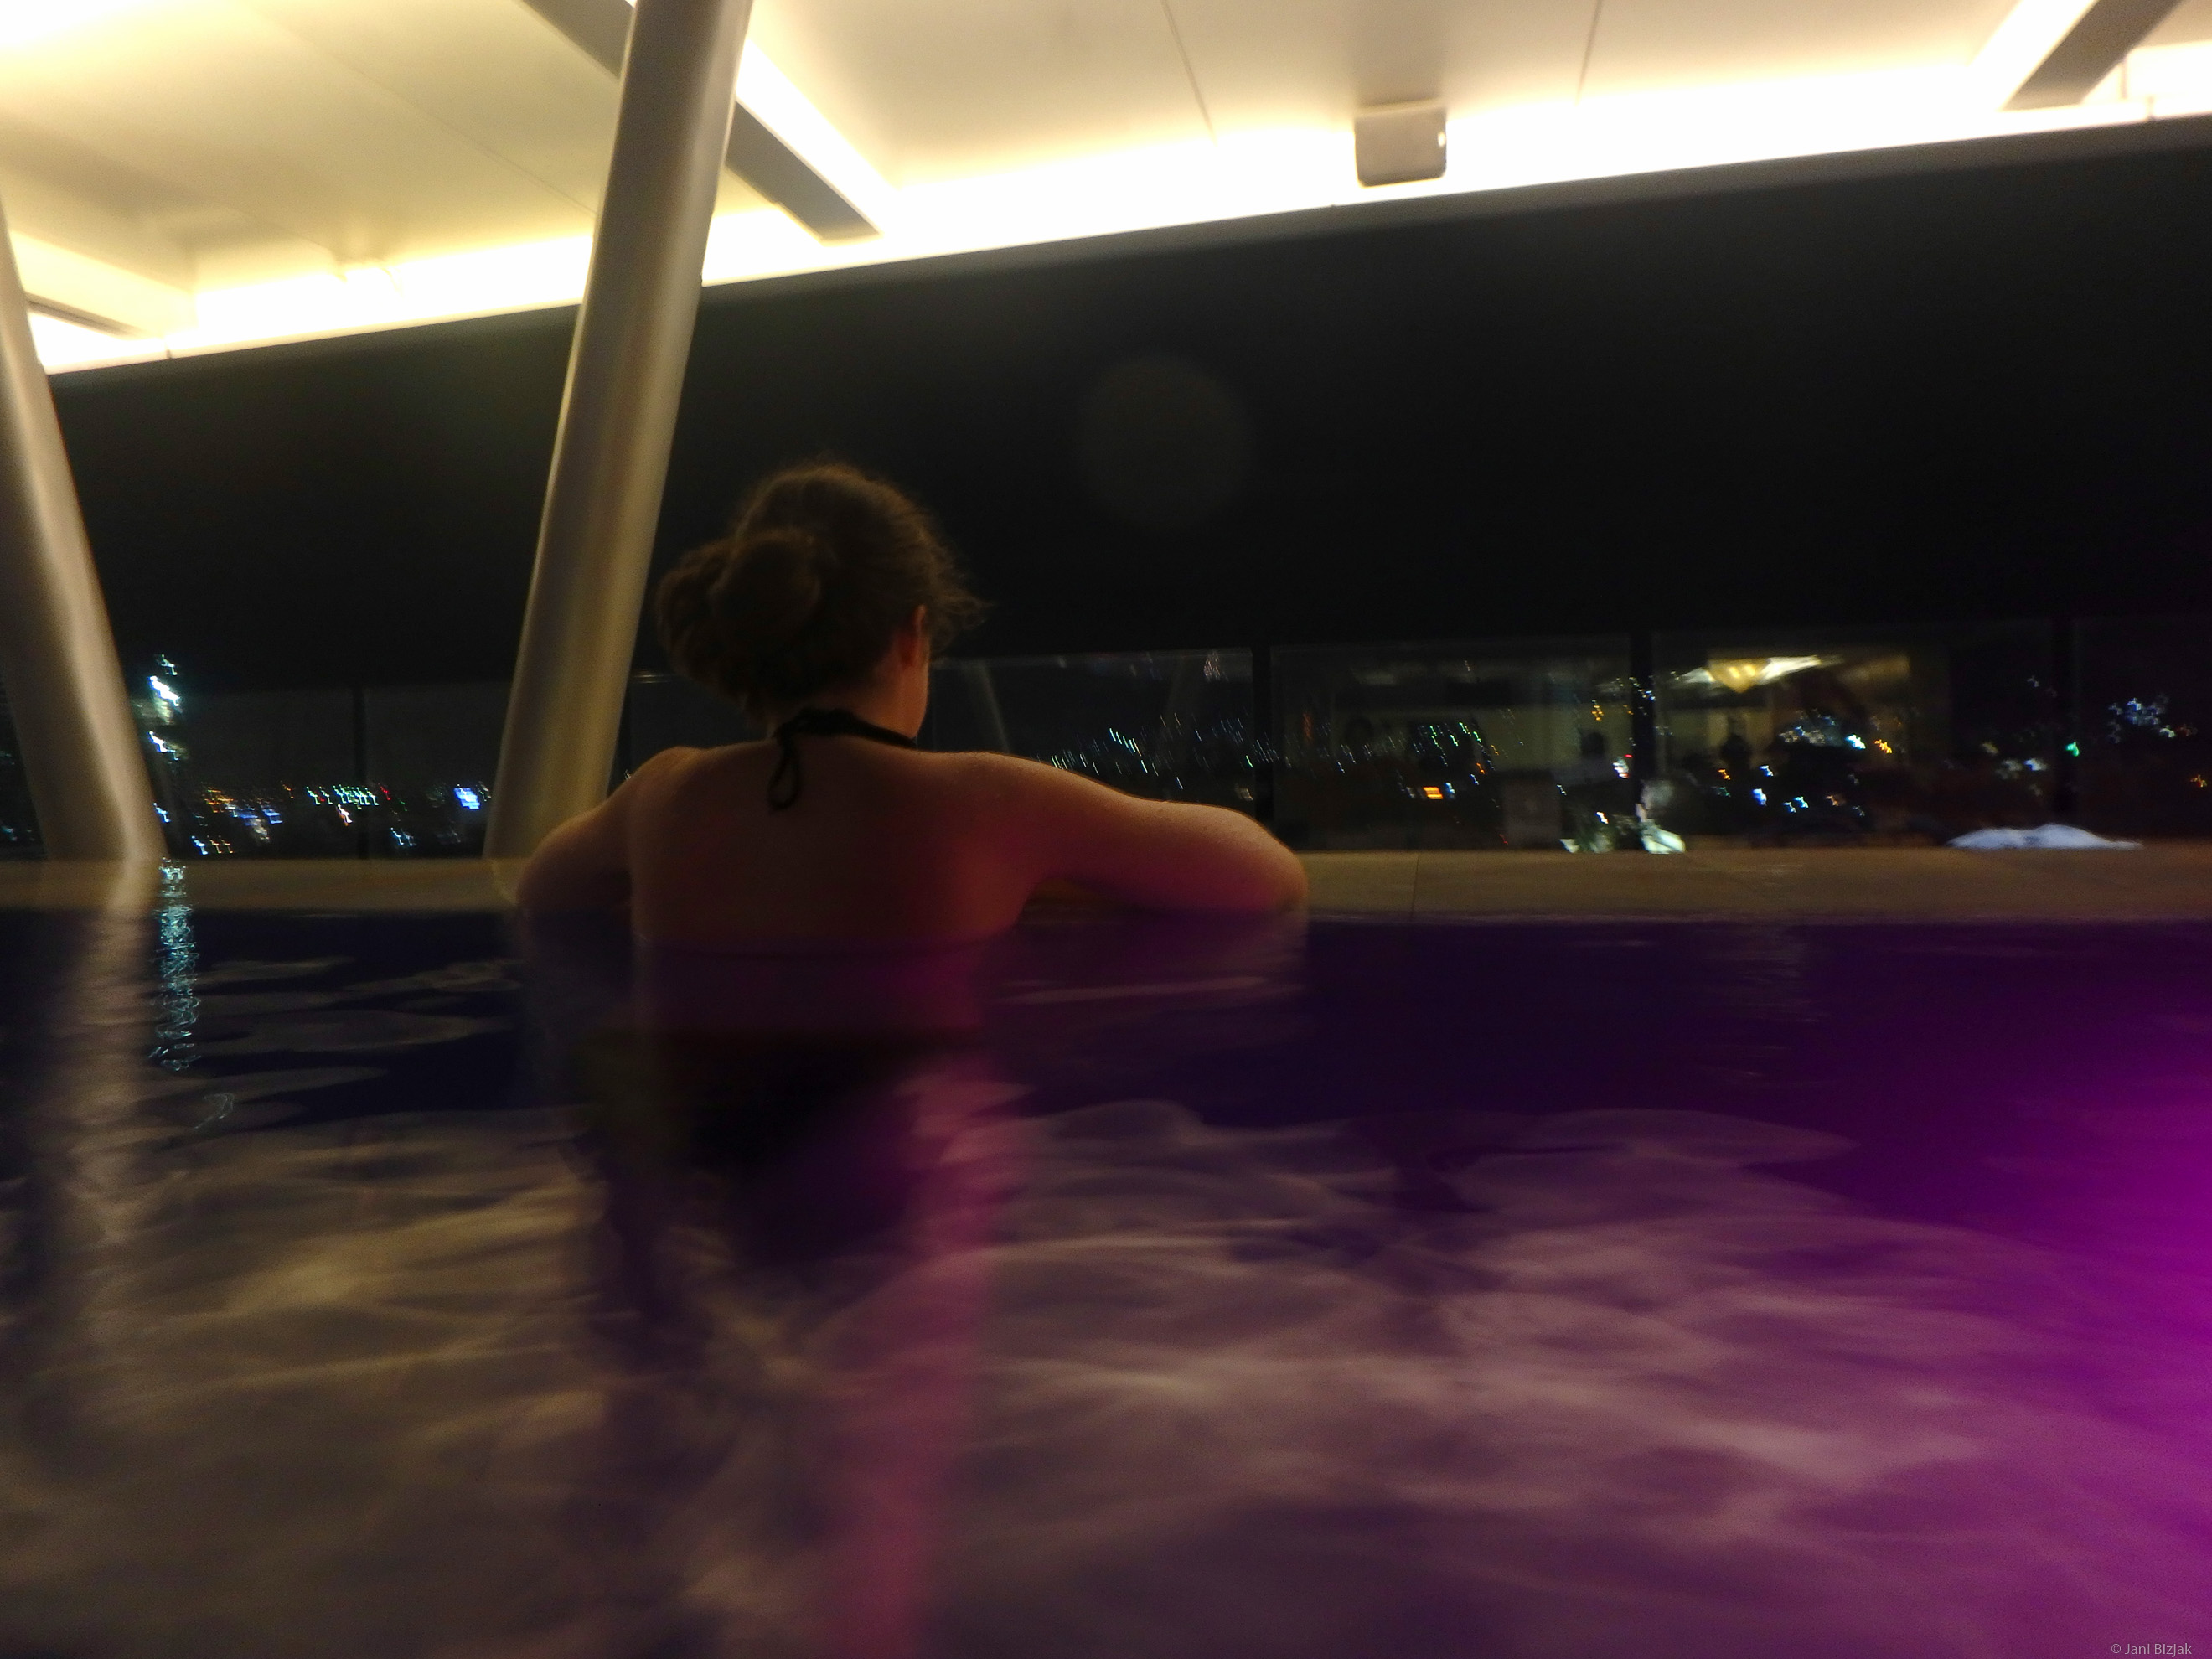 It had an infinity swimming pool on the rooftop.